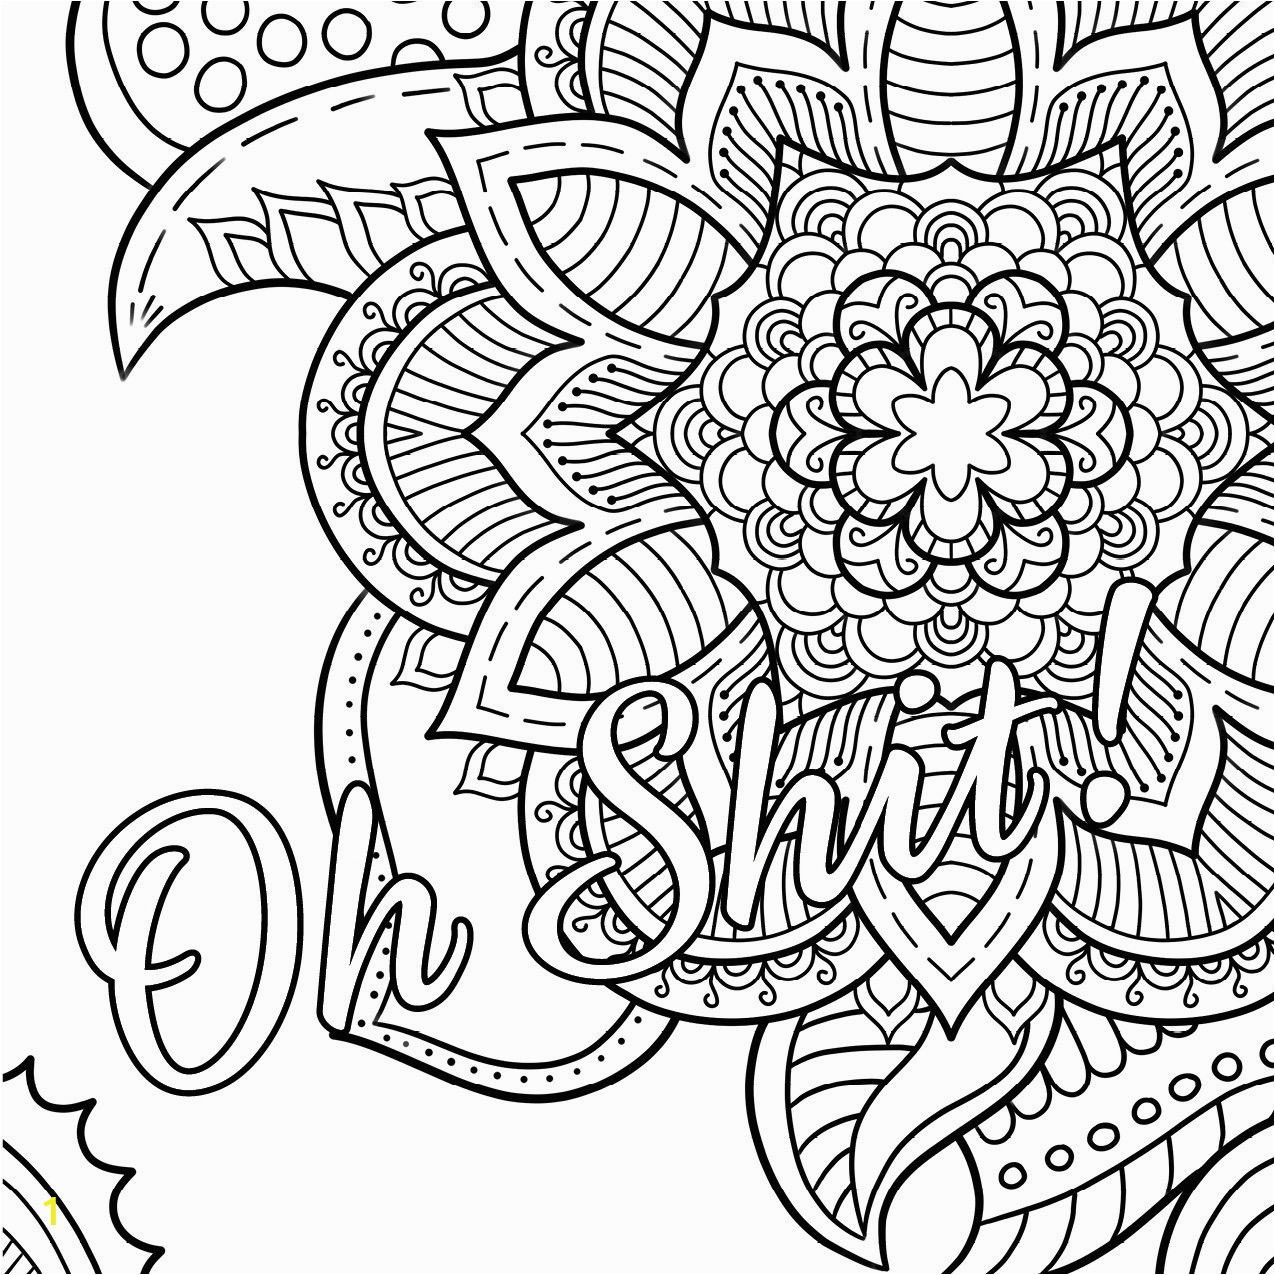 Free Printable Coloring Pages for Adults Swear Words Swear Word Coloring Book 2 Free Printable Coloring Pages